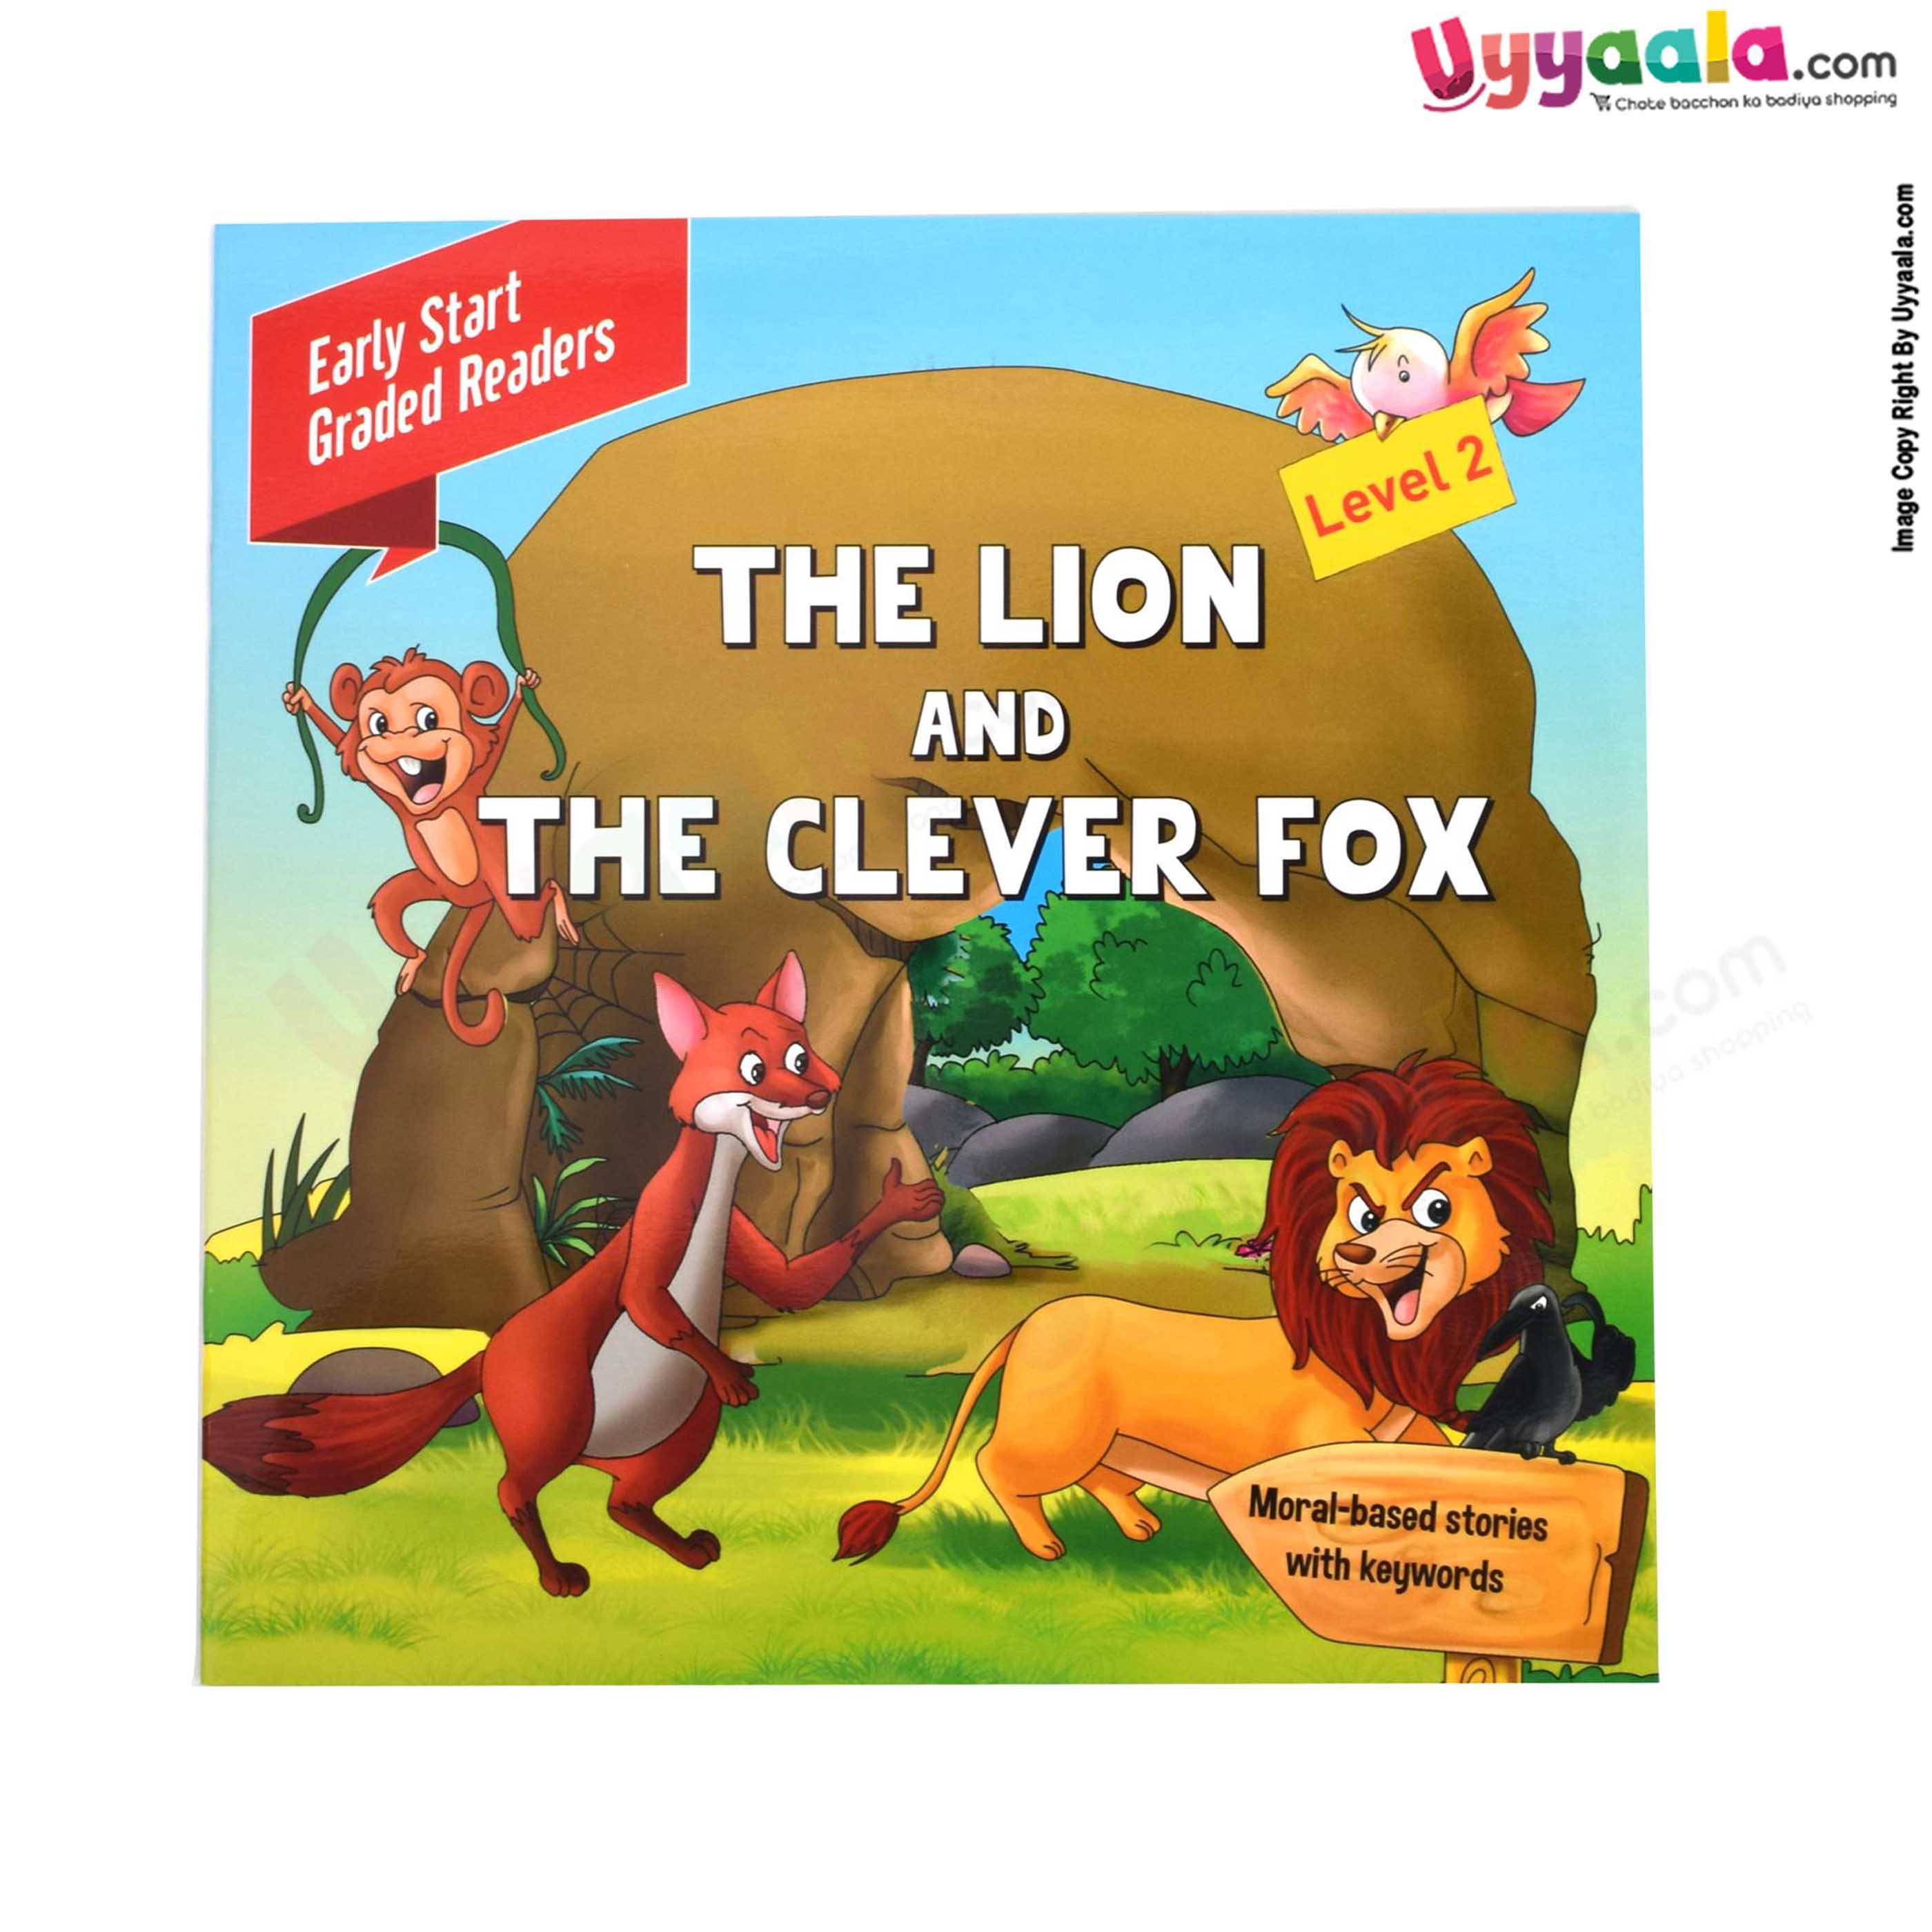 Early start graded readers - moral based stories, the lion and the clever fox, level - 2 (2 - 5 years)